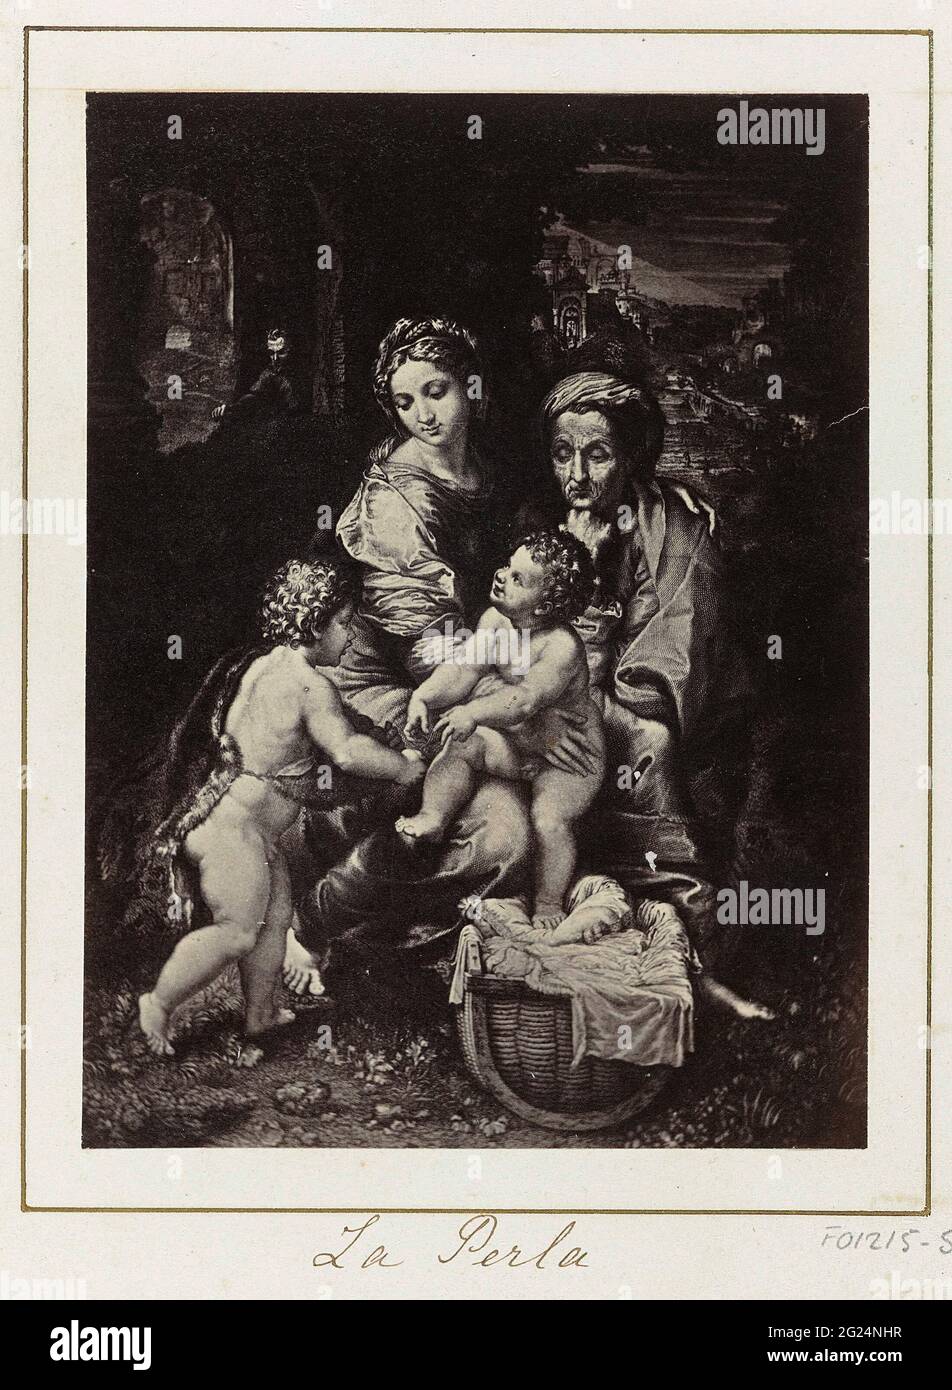 Photo production of (presumably) a print to a painting by Rafaël, representing the Holy Family (La Perla). Part of travel album with recordings of artworks, people and sights in Spain. Stock Photo